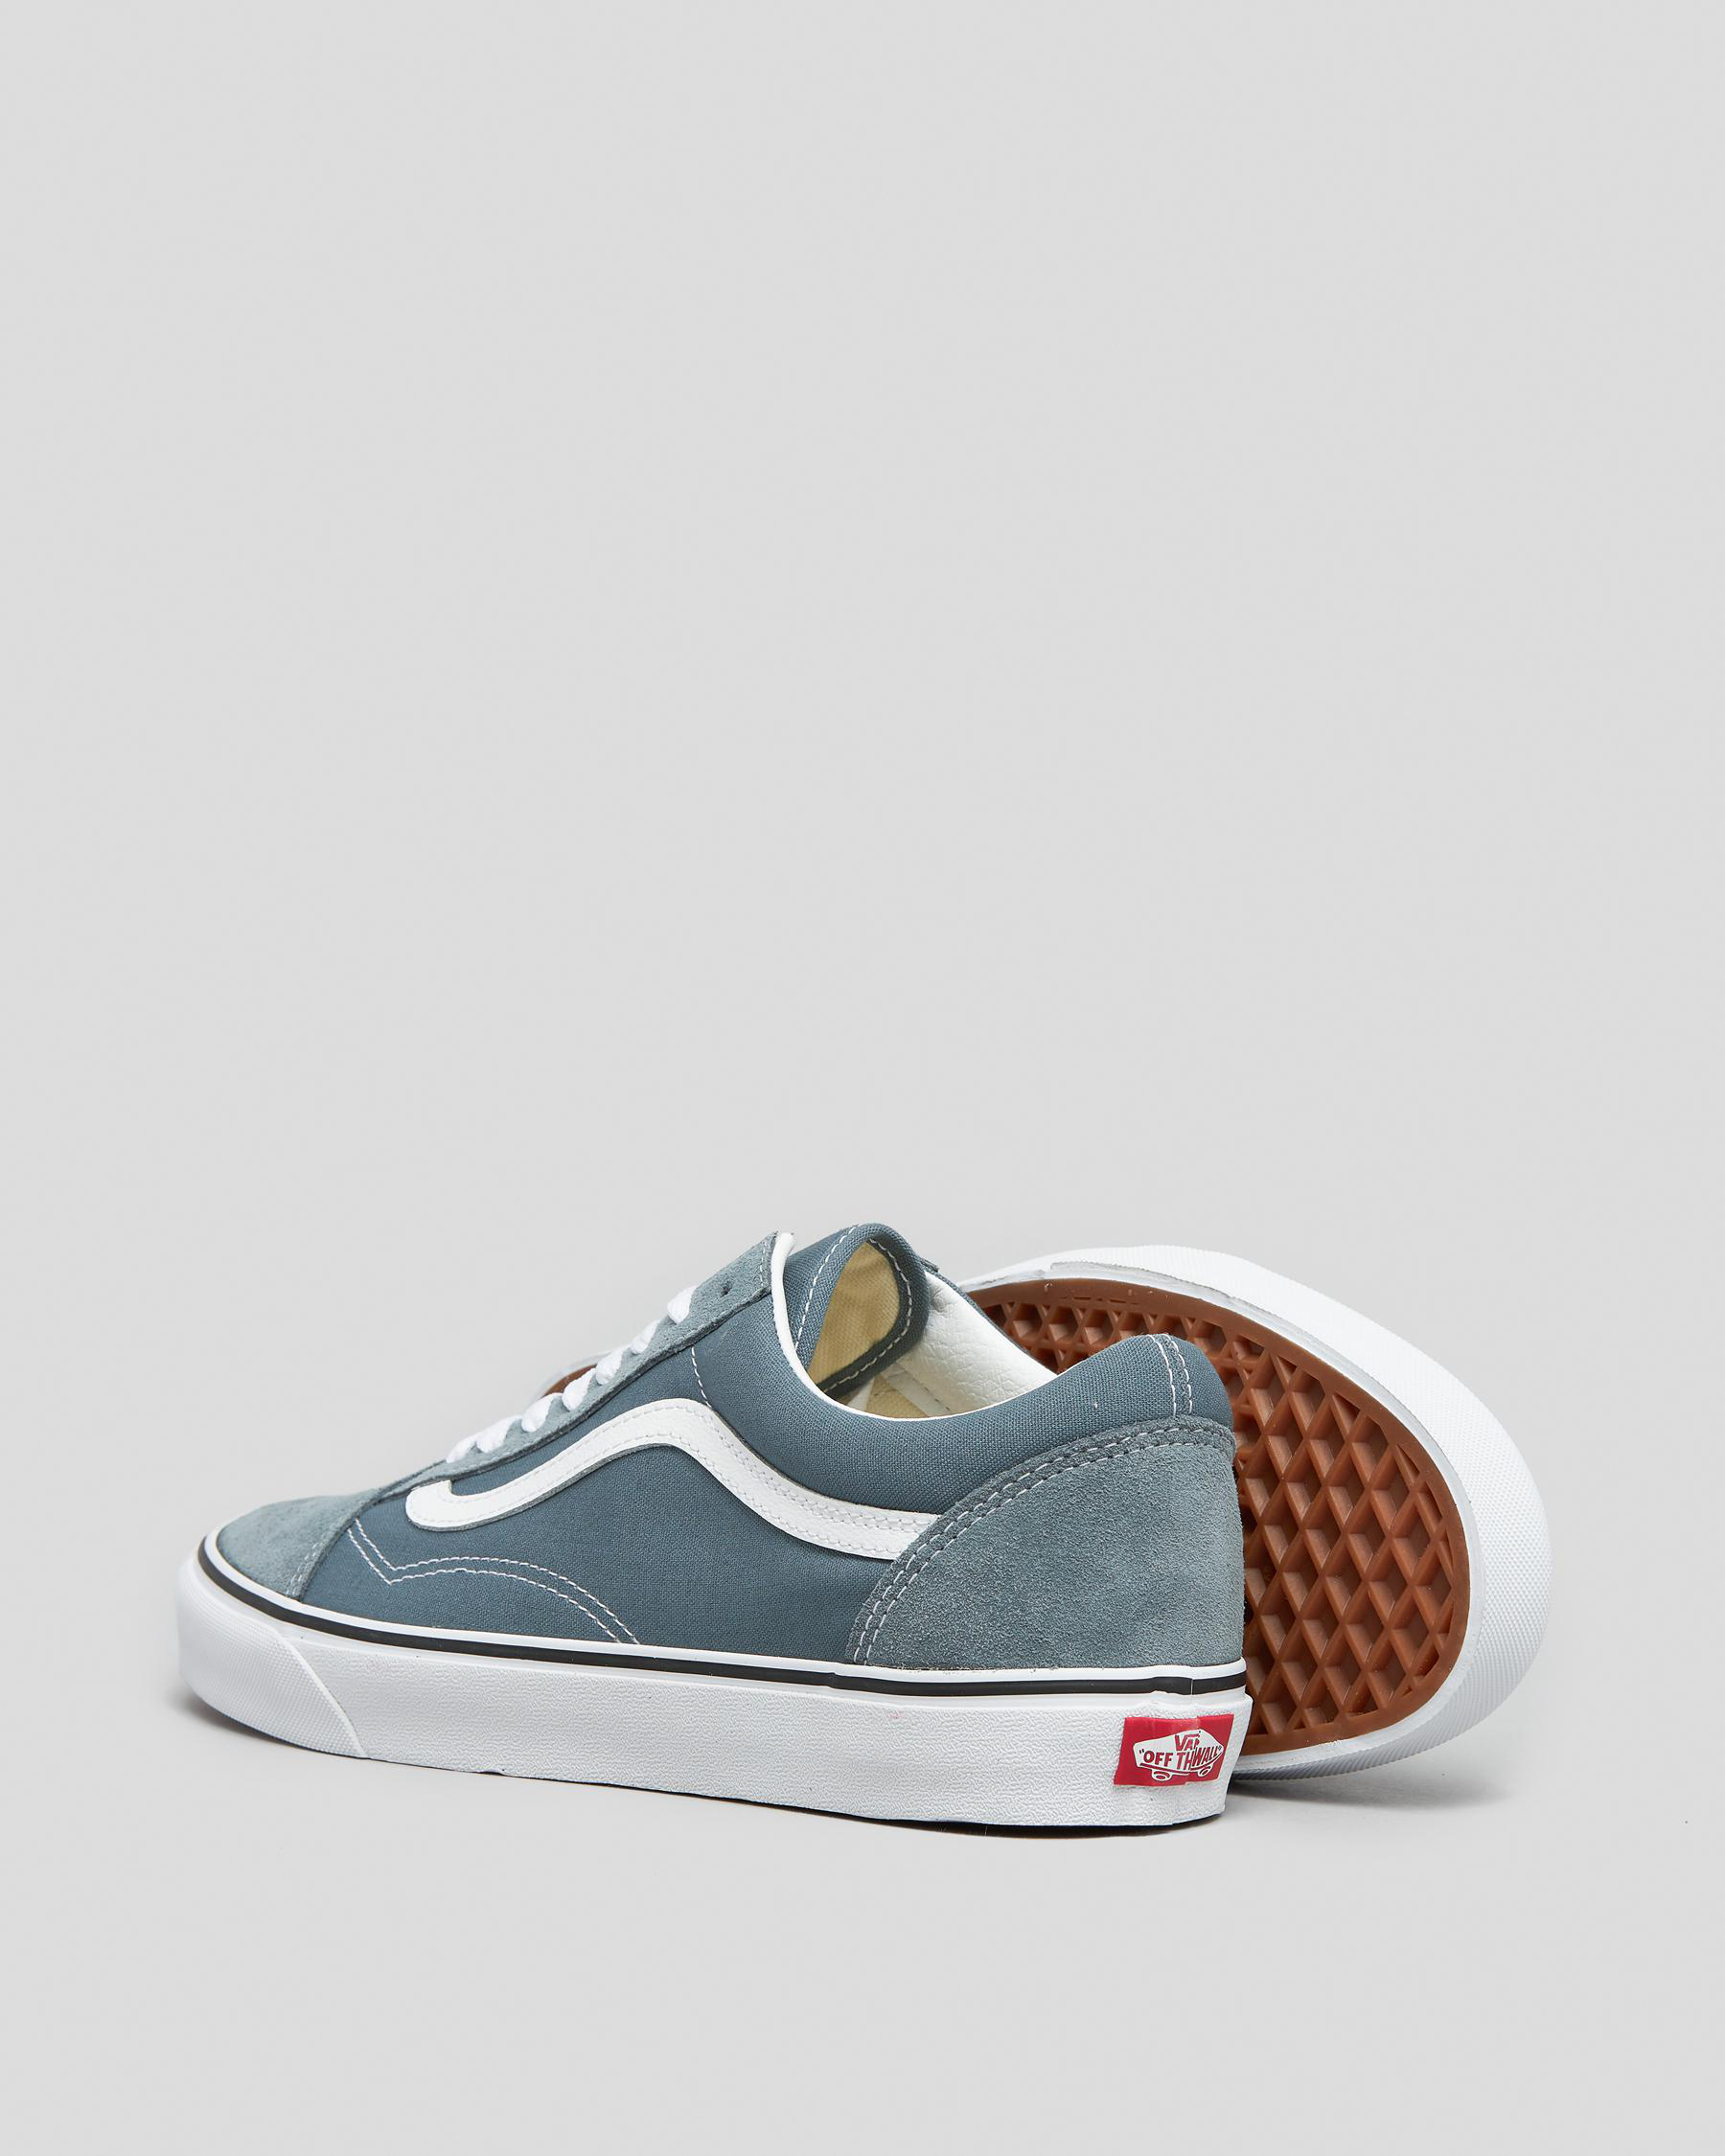 Vans  Old Skool Color Theory Stormy Weather Classics Shoe